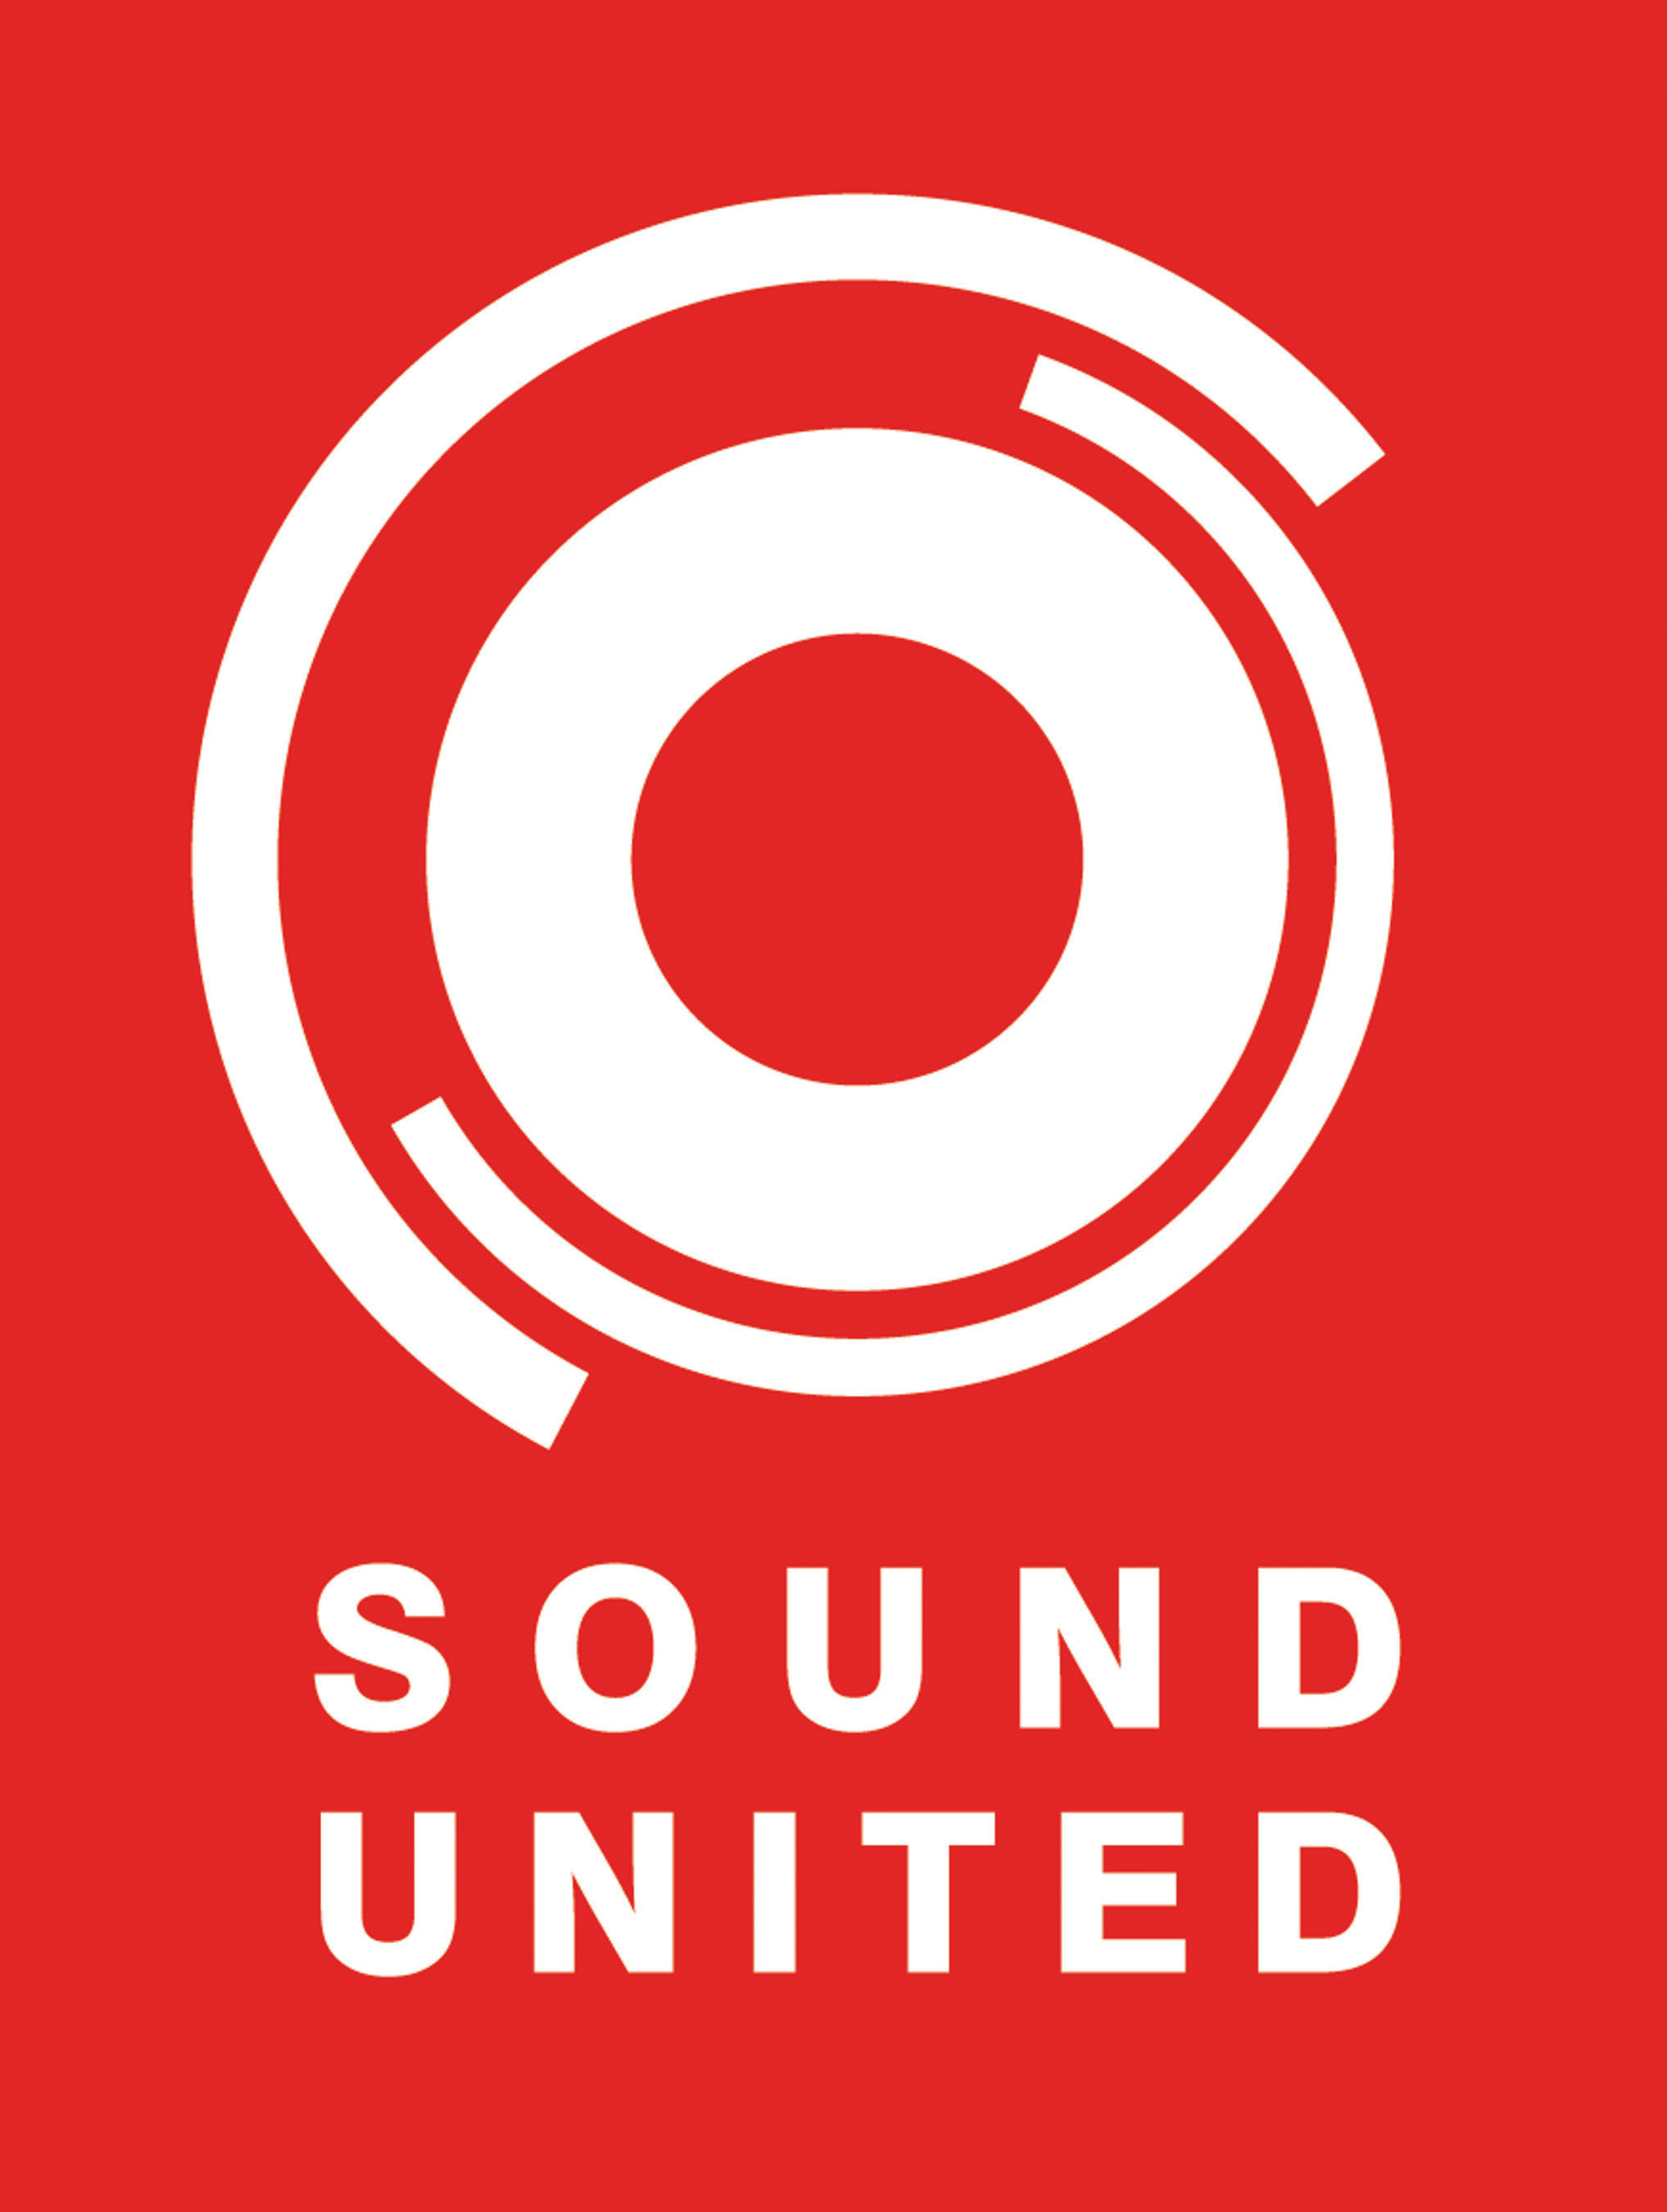 Headquartered in Southern California, Sound United is an audio division of DEI Holdings, Inc., which is the parent company to some of the most respected brands in the consumer electronics industry. The Sound United family of audio brands includes Definitive Technology, a 25-year veteran in the high-end home audio space; Polk, an audio brand with more than 40 years of experience pioneering high-quality personal audio; and BOOM, a portable audio brand targeting the youthful action-sports oriented consumer.